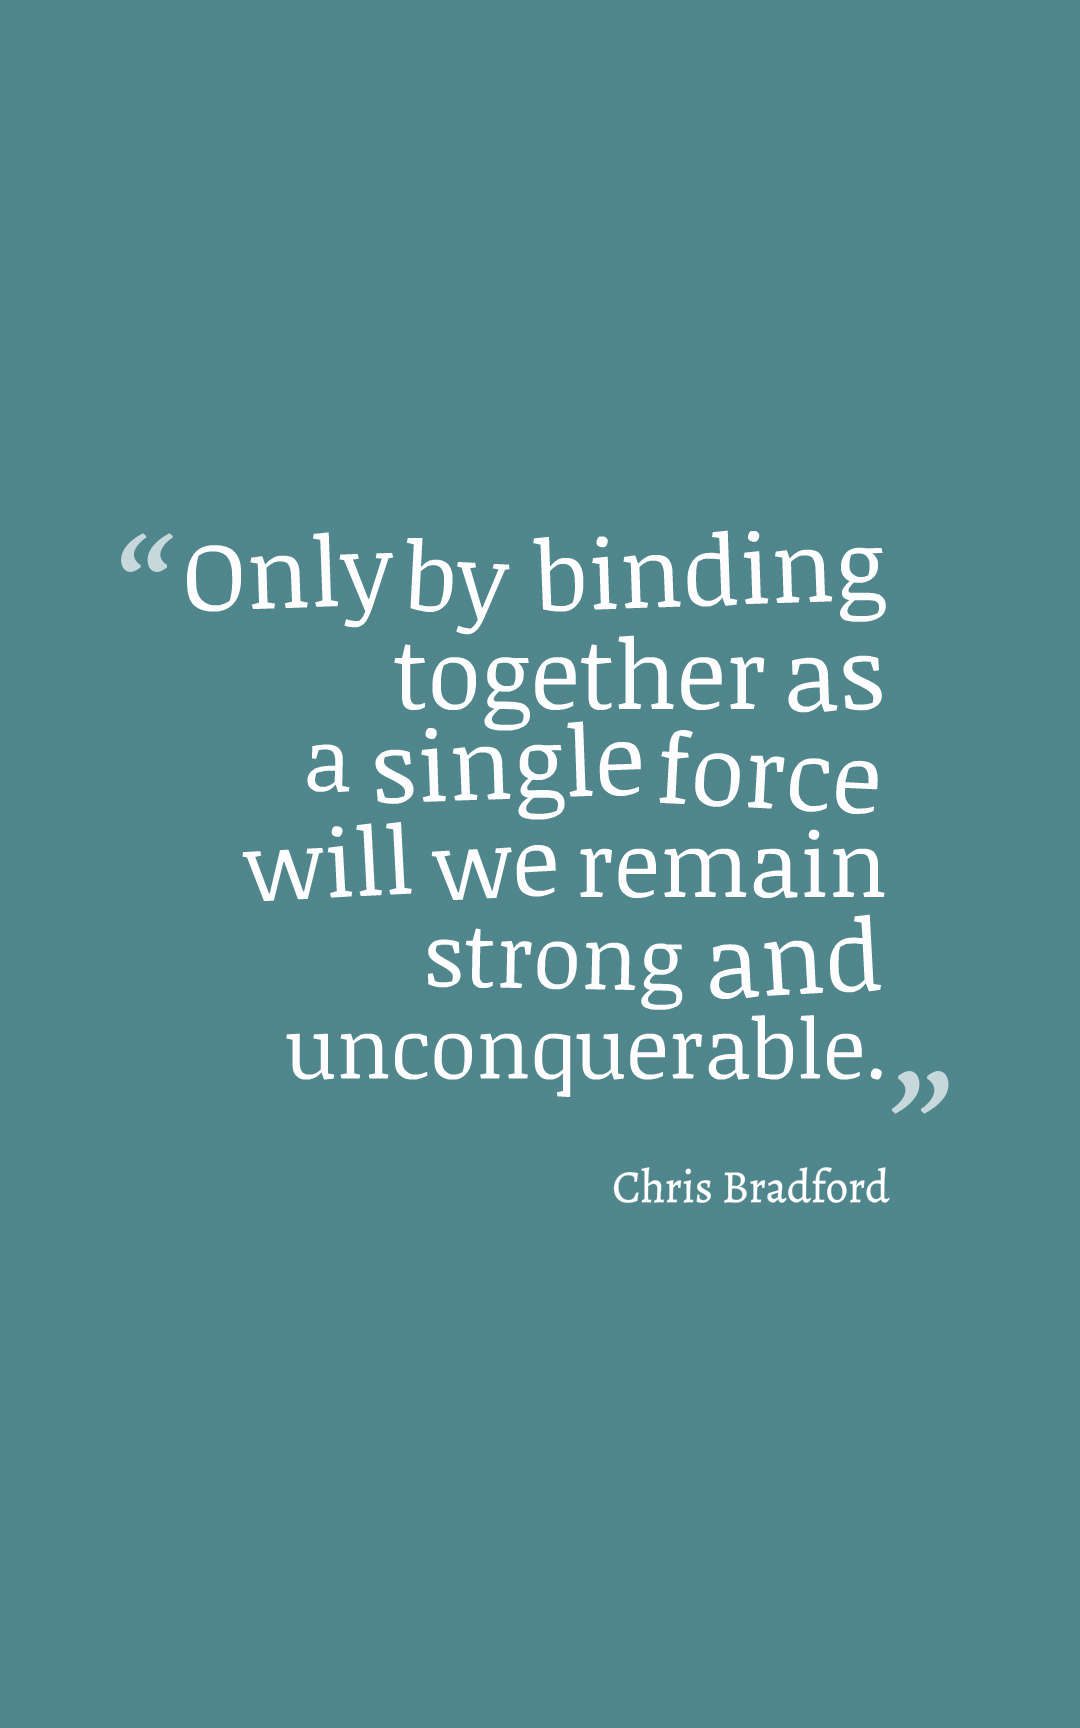 Only by binding together as a single force will we remain strong and unconquerable.